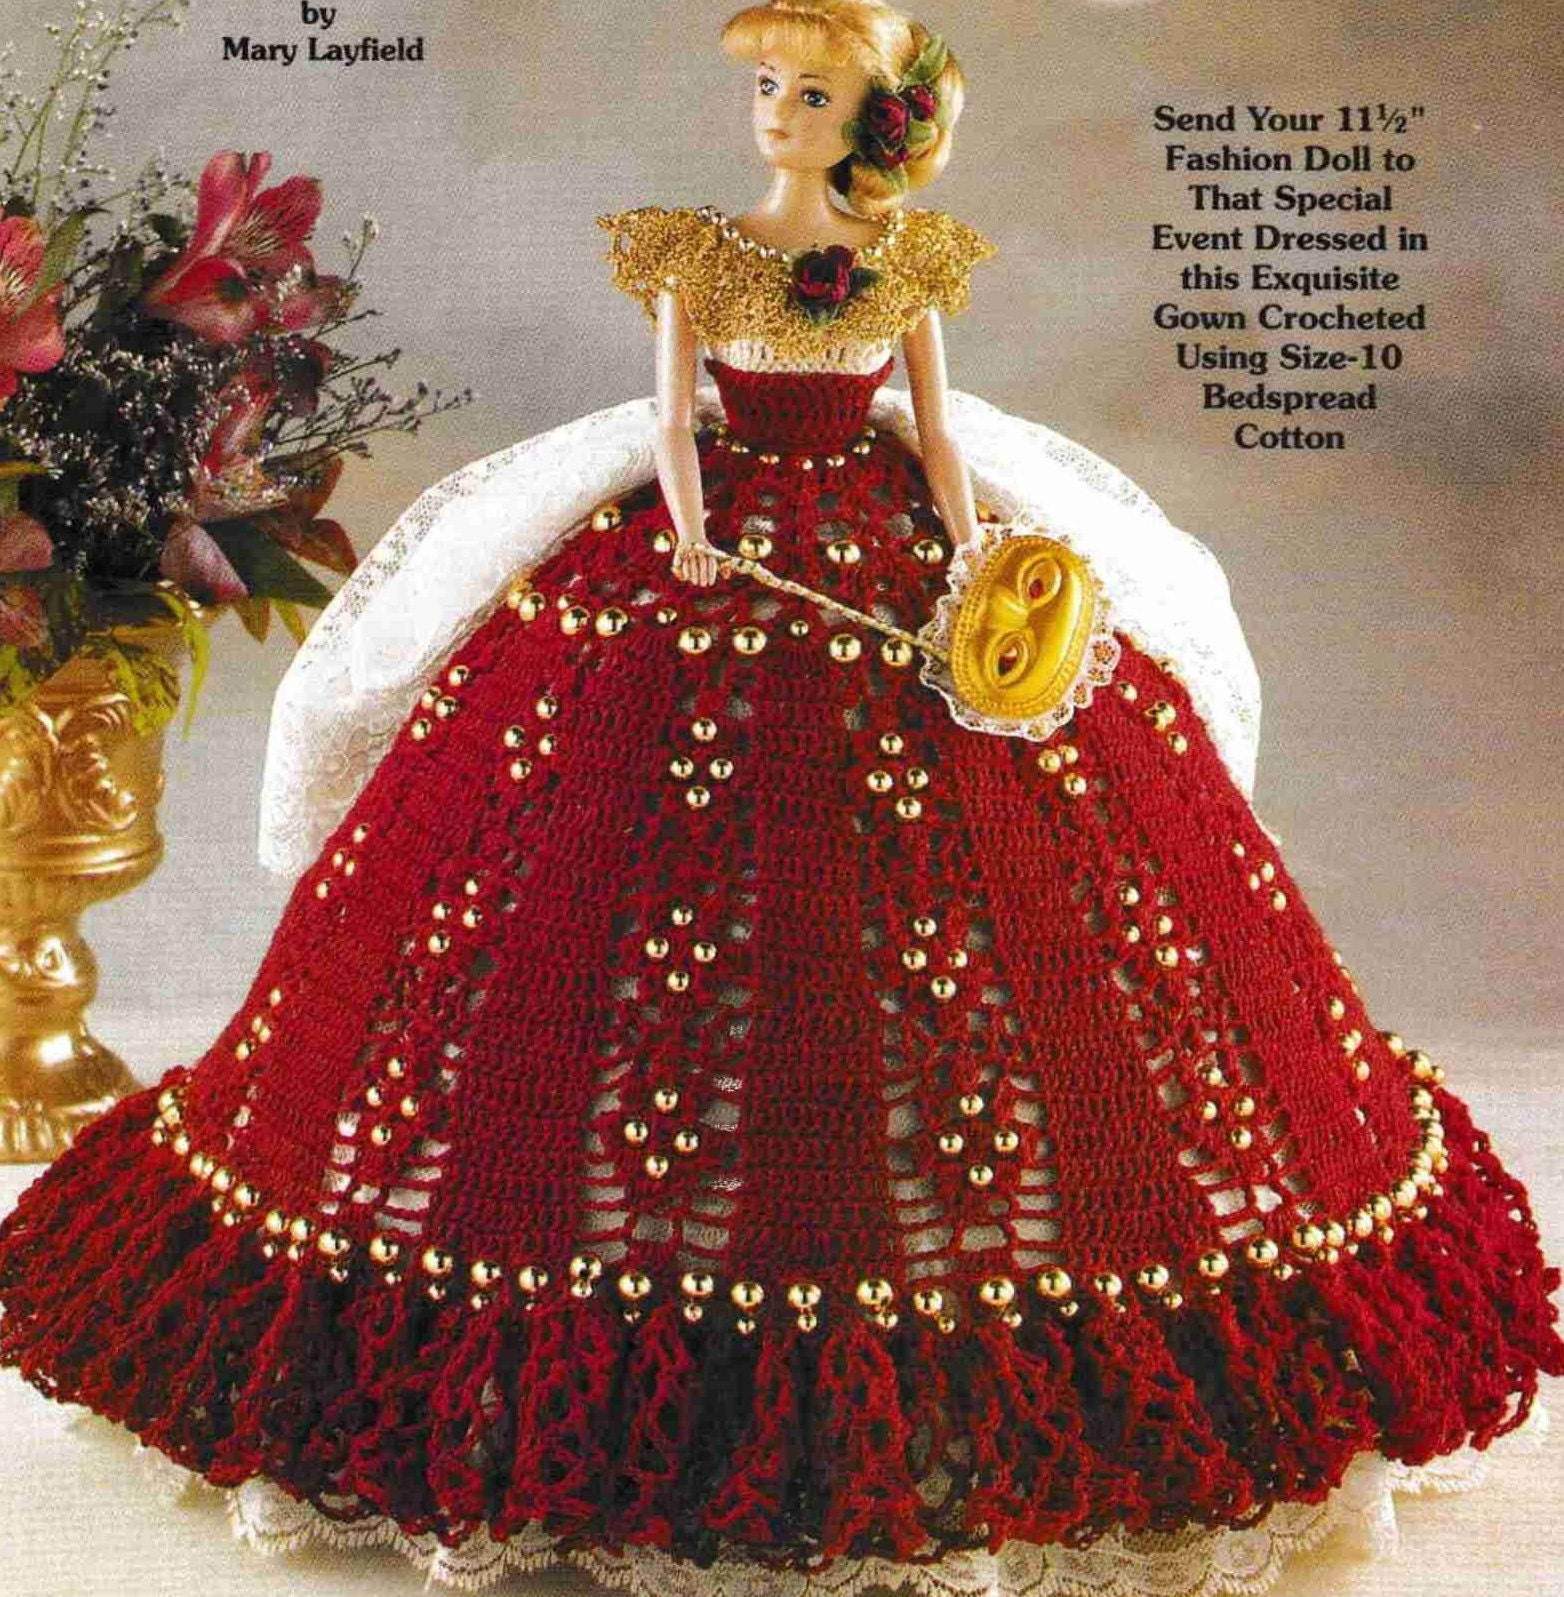 PATTERN FOR 18 INCH BARBIE BARBEQUE DRESS -GONE WITH THE WIND | eBay